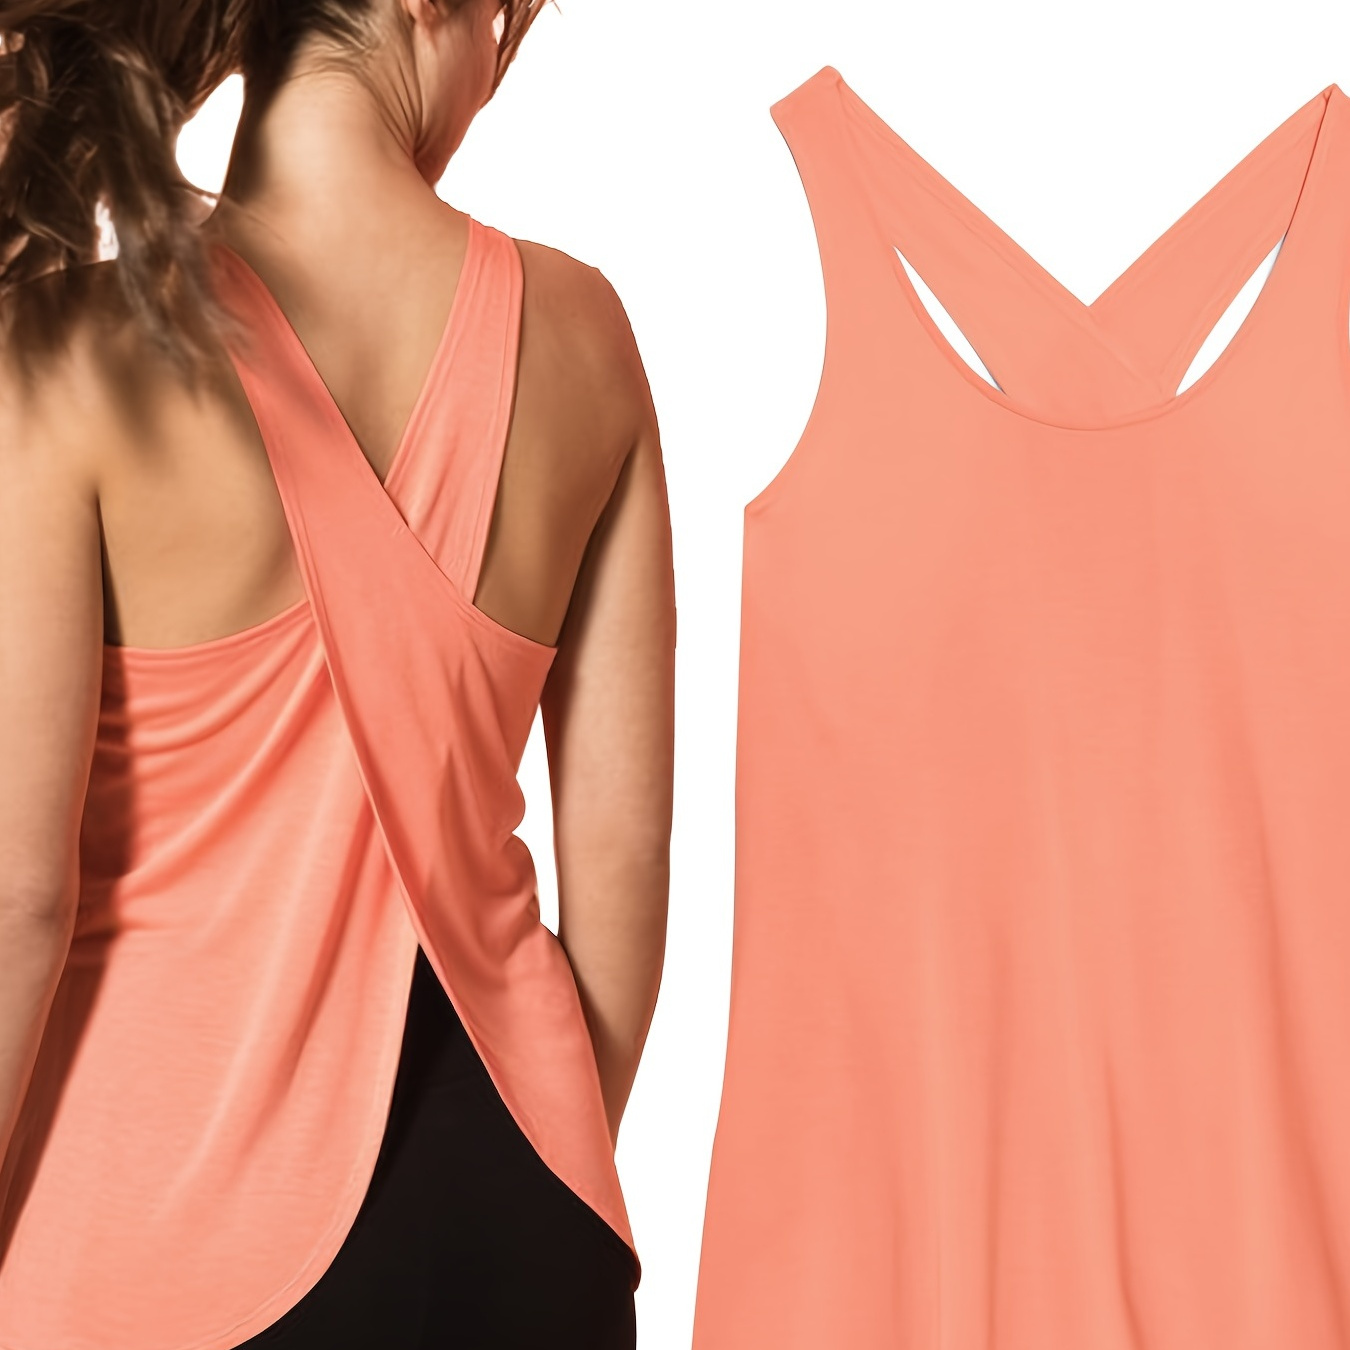 

Solid Wrap Back Sports Tank Tops, Sleeveless Breathable Asymmetrical Hem Fitness Workout Casual Tops, Women's Activewear